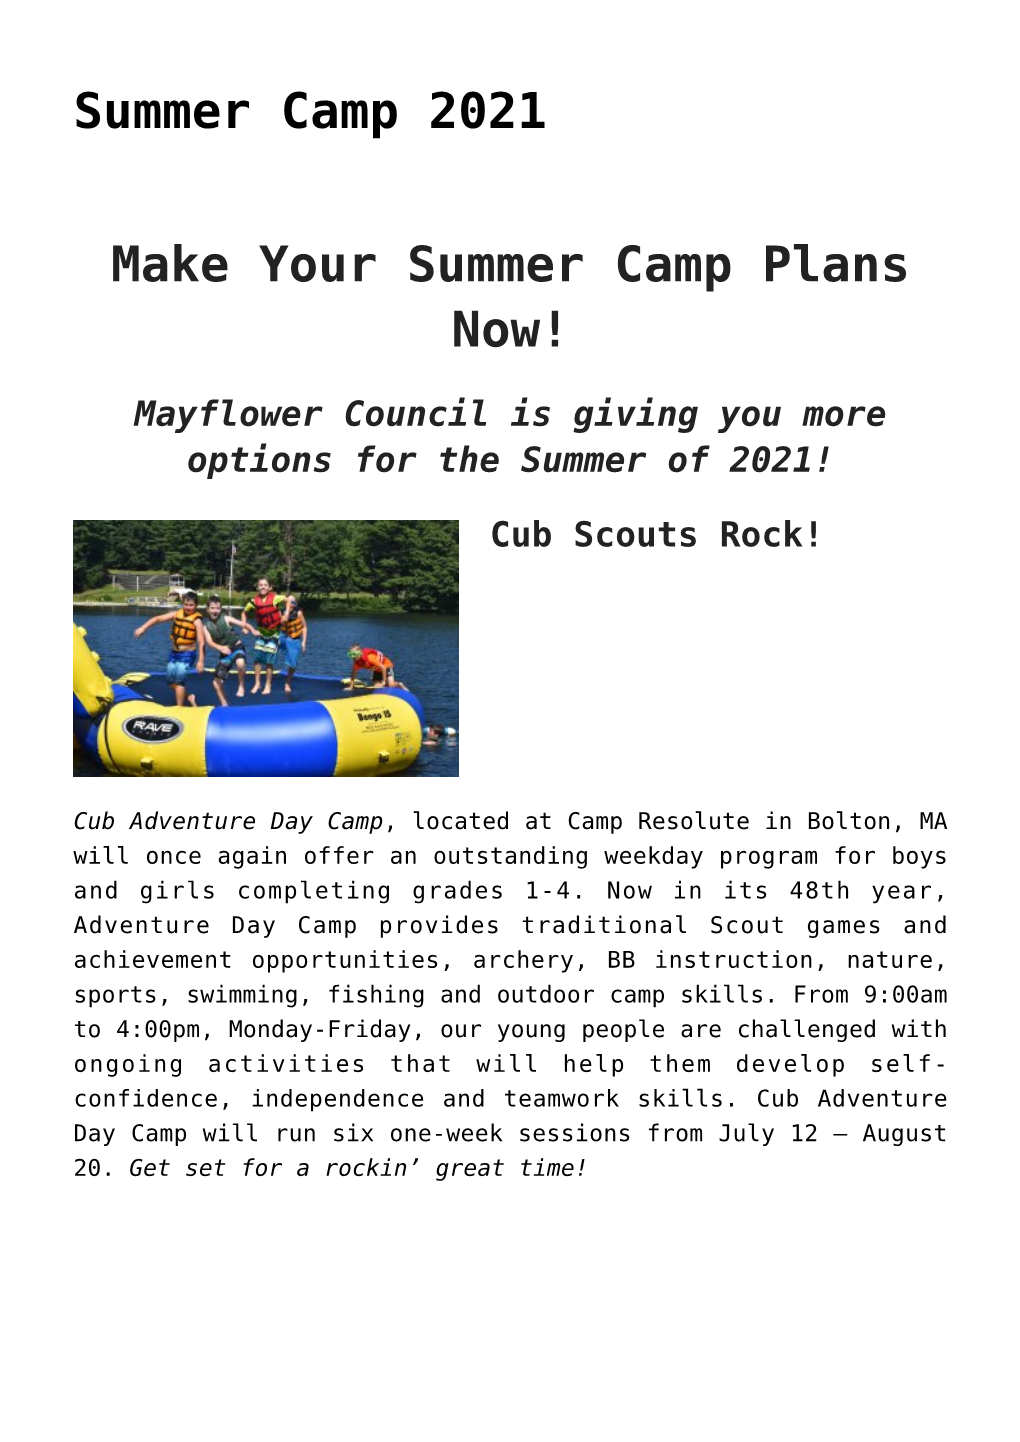 Summer Camp 2021,Swim Tests,Limited Edition Council